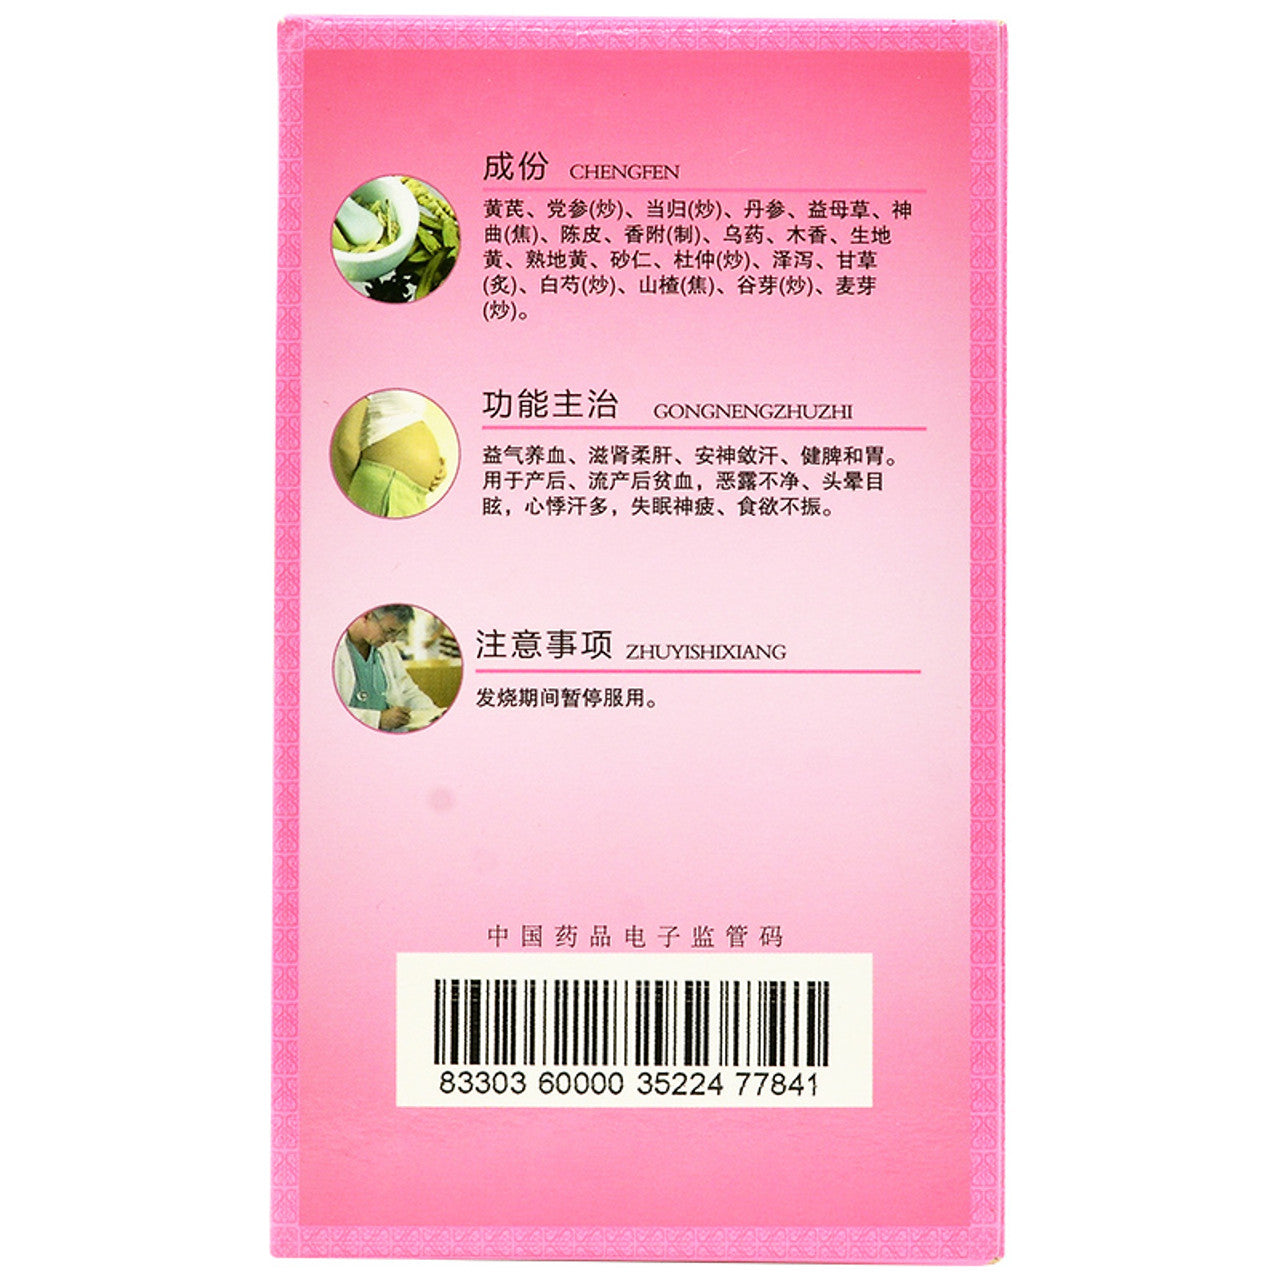 China Herb. Brand Baochang. Chanhoukang Gao or Chanhoukang Syrup or Chan Hou Kang Gao or Chan Hou Kang Syrup or ChanHouKangGao  For postpartum and post-abortion anemia, unclean lochia, dizziness, palpitations and sweating, insomnia.